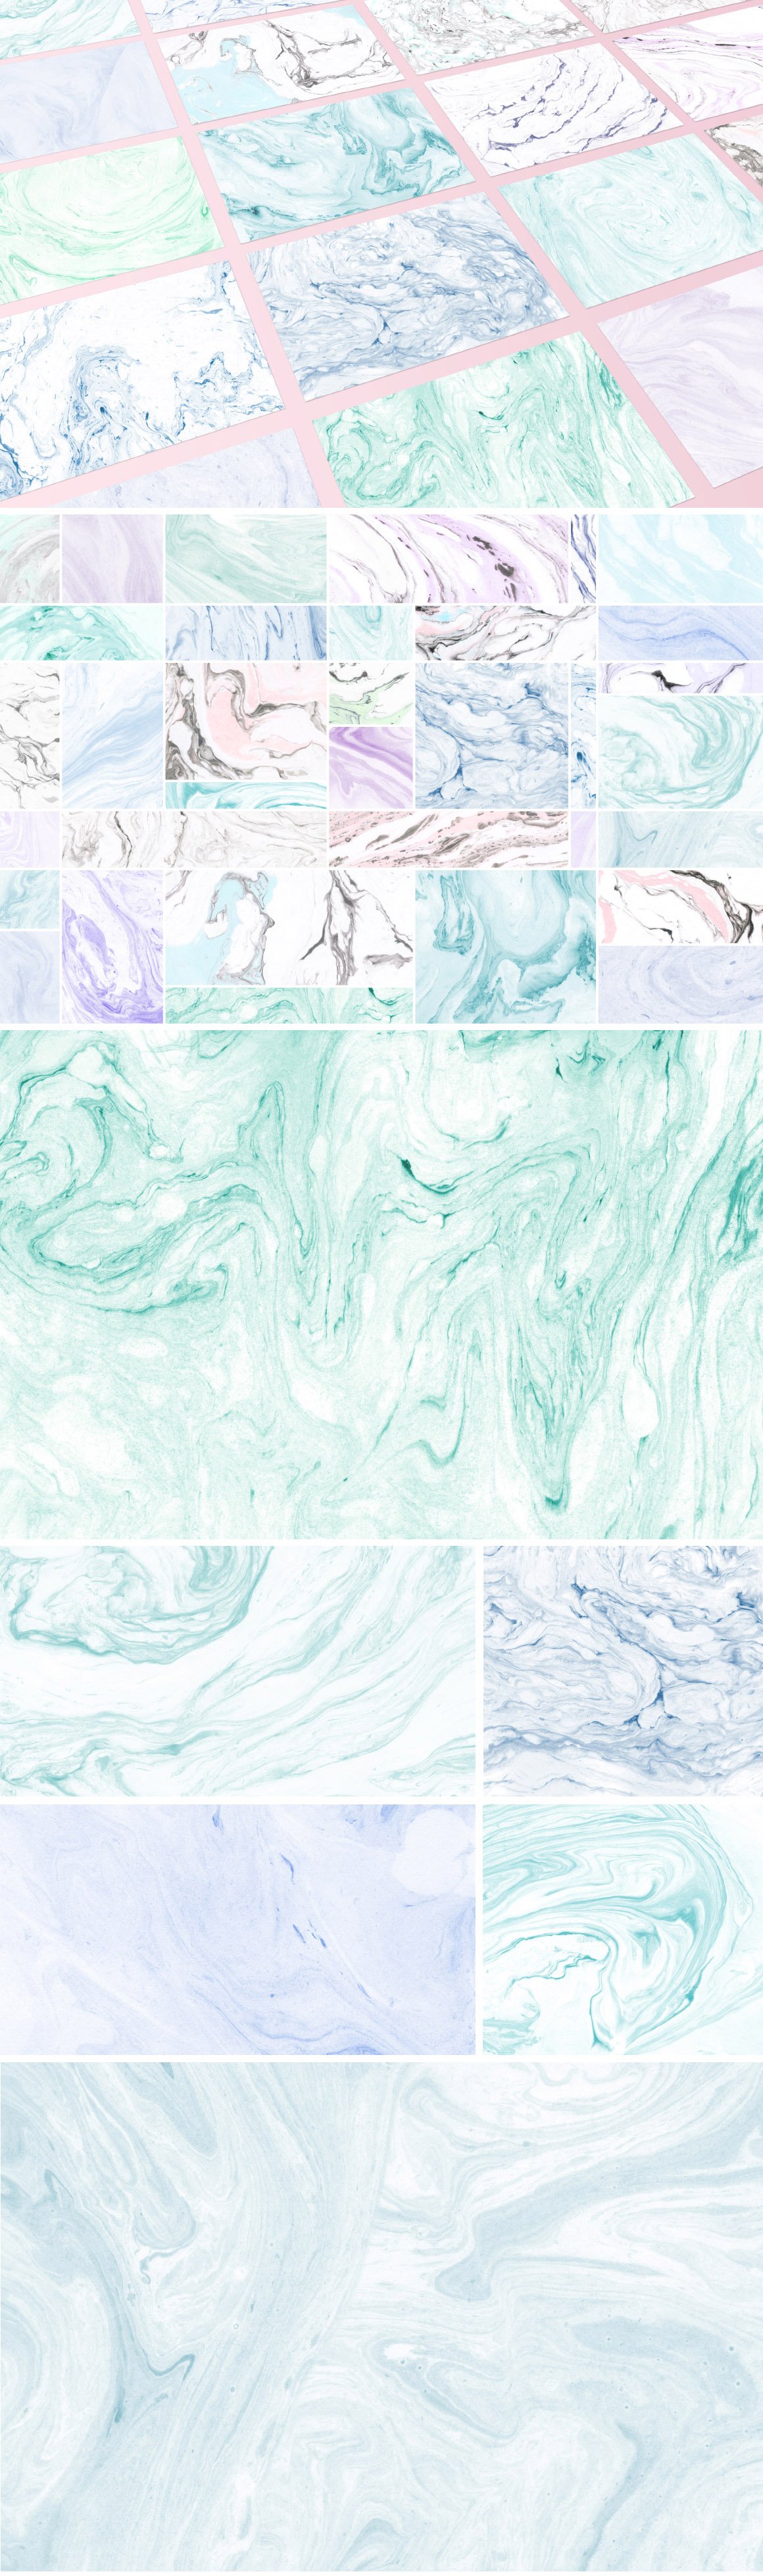 Marble Paper Textures